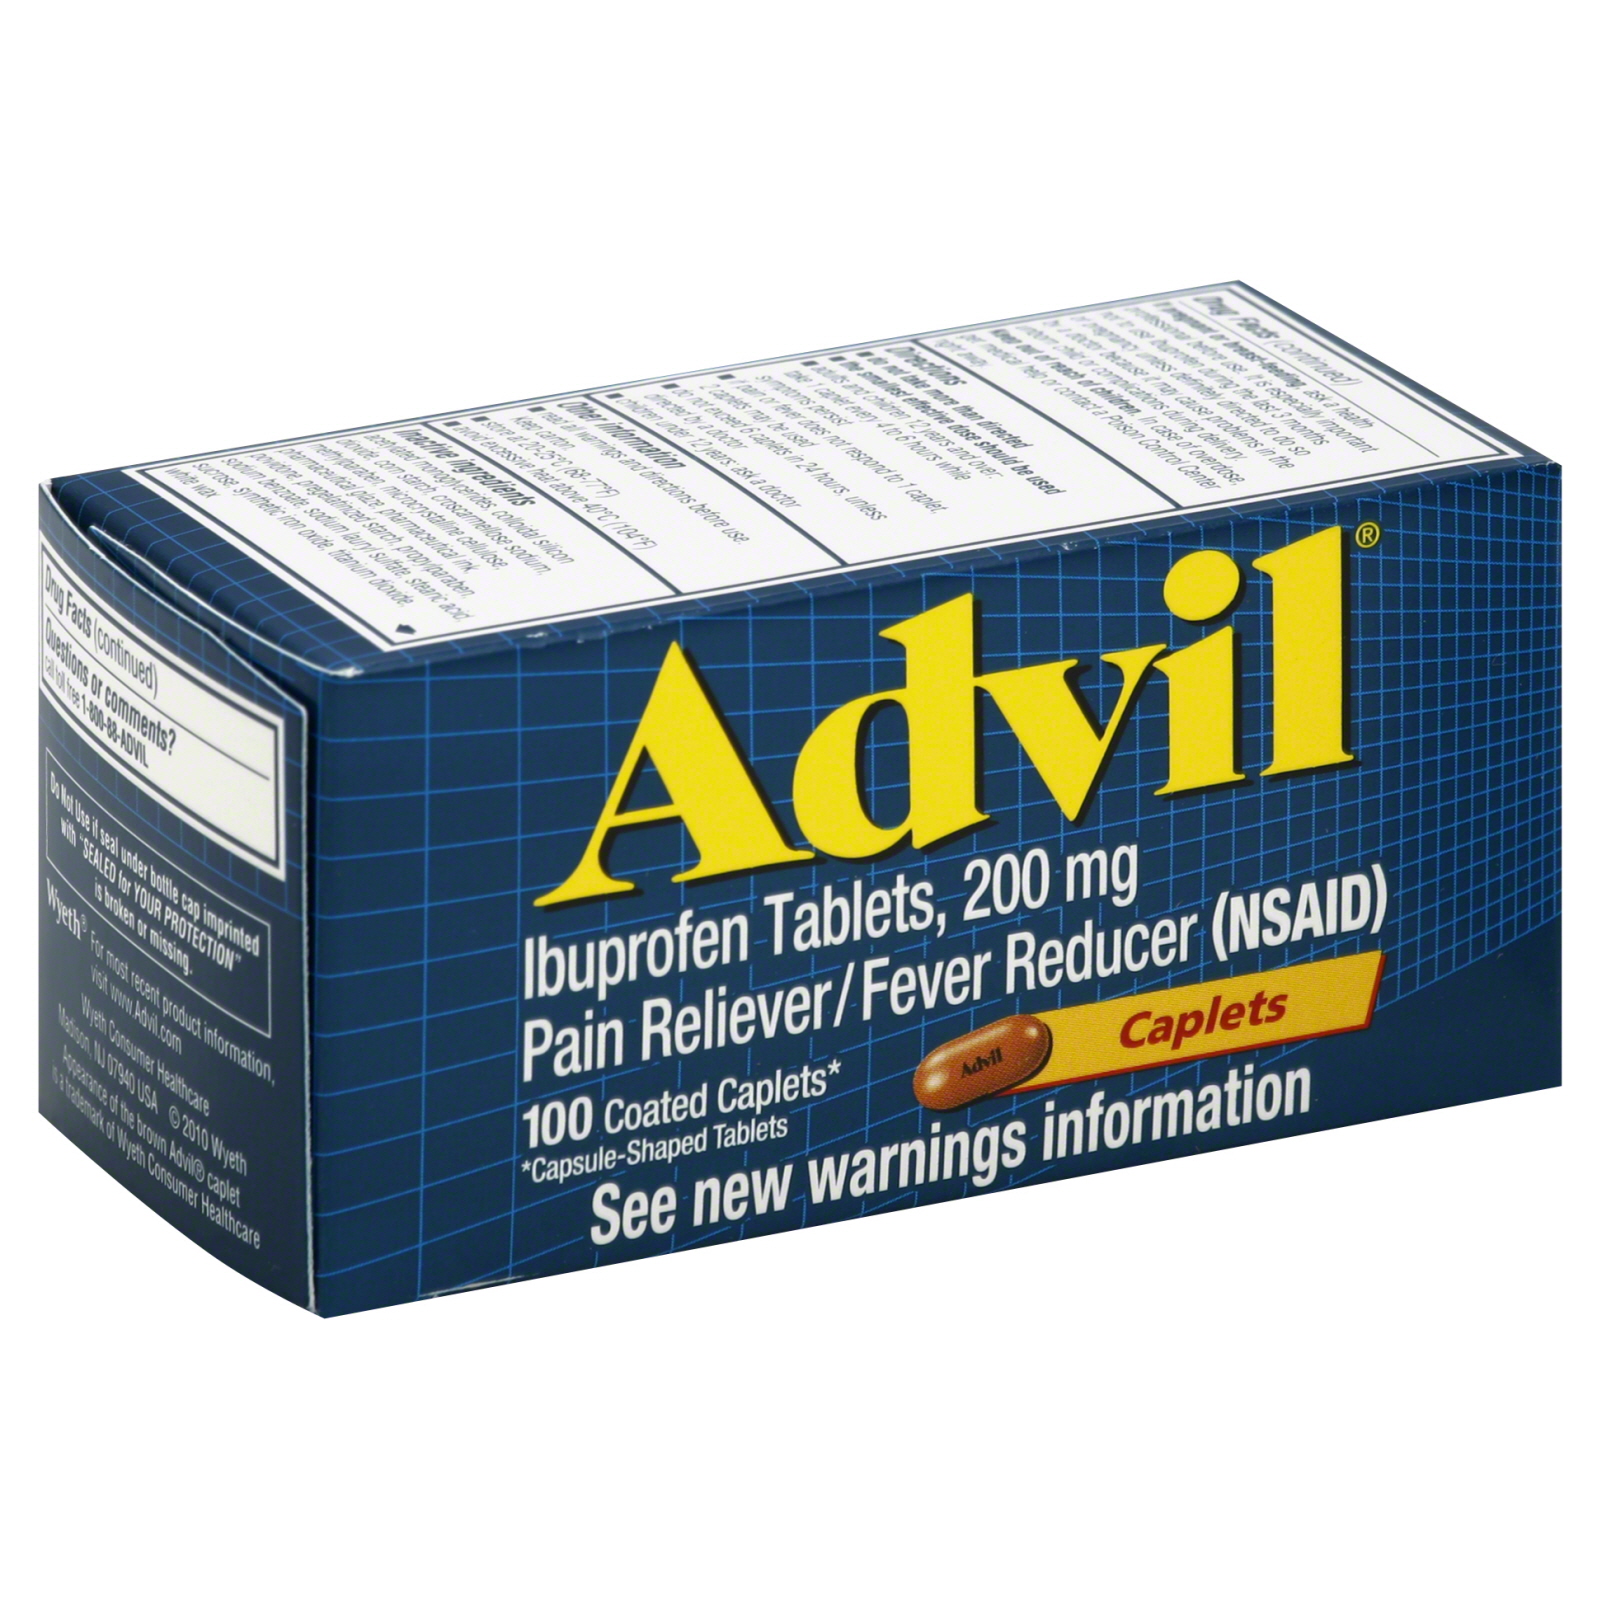 advil-pain-reliever-fever-reducer-200-mg-coated-caplets-100-caplets